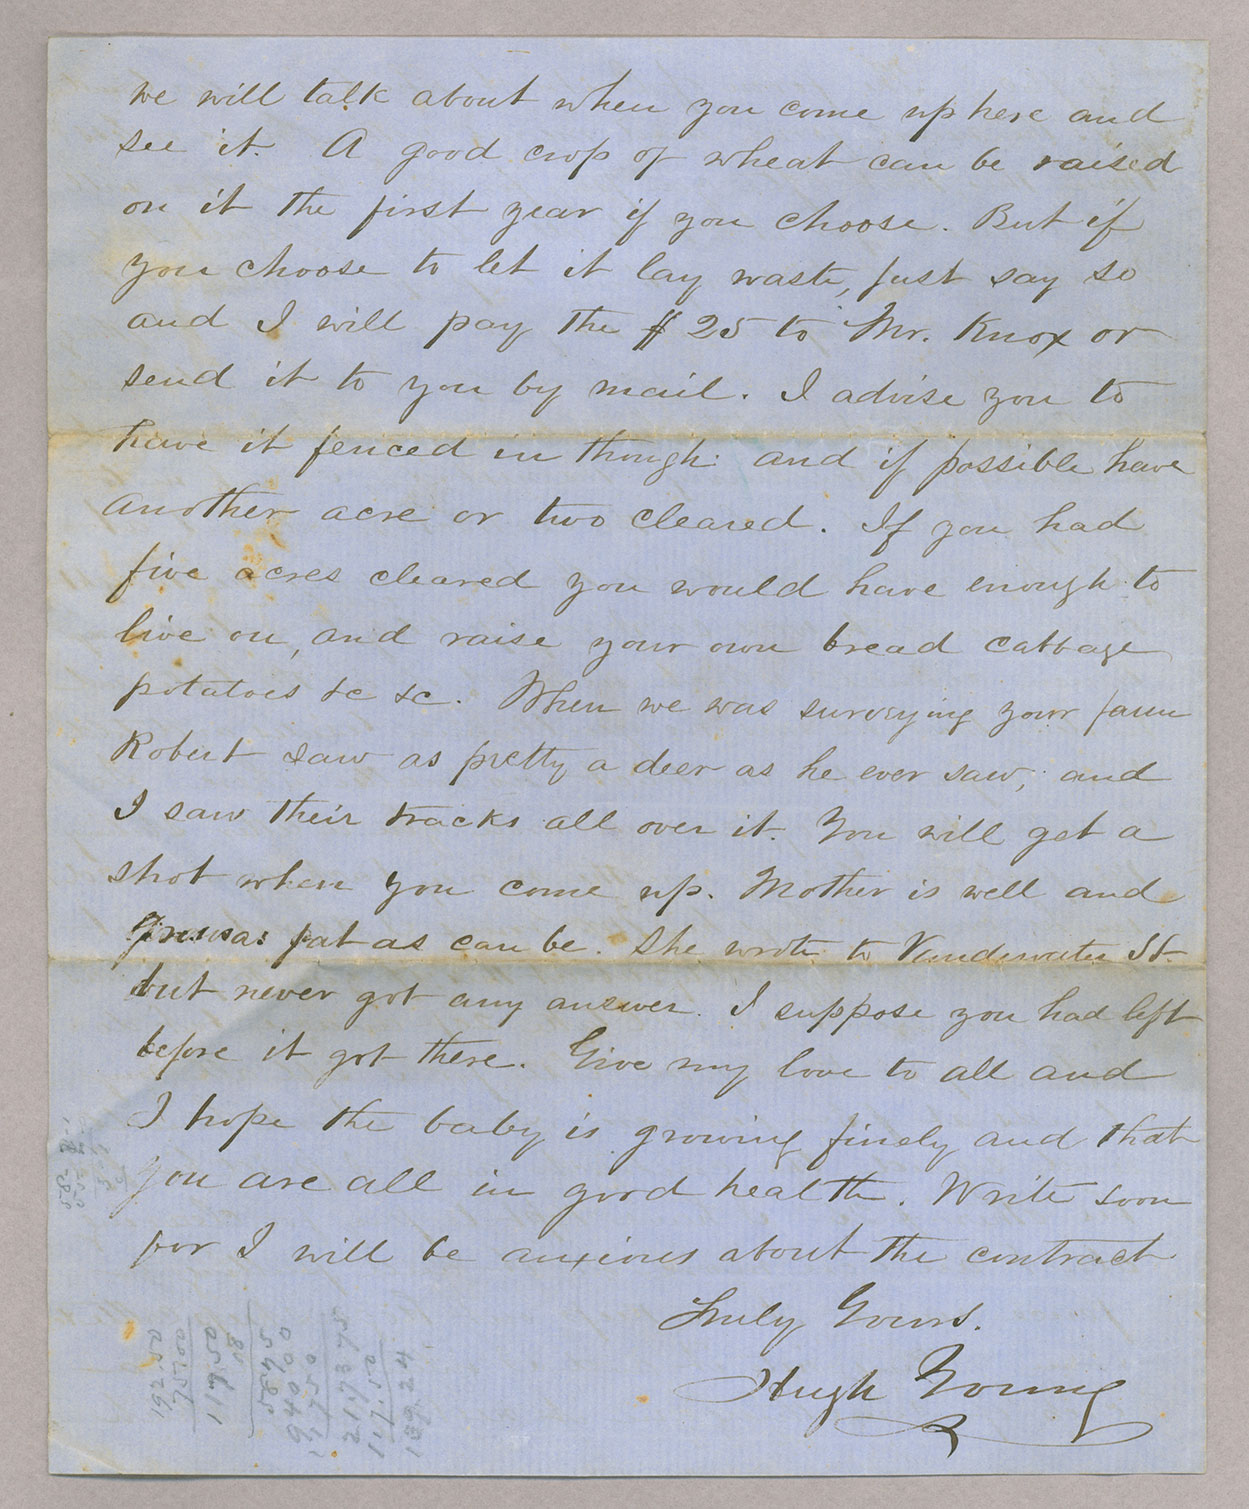 Letter. Hugh Young, Coudersport, Pennsylvania, to "Dear Johnny" [John E. Brownlee], n. p., Page 4